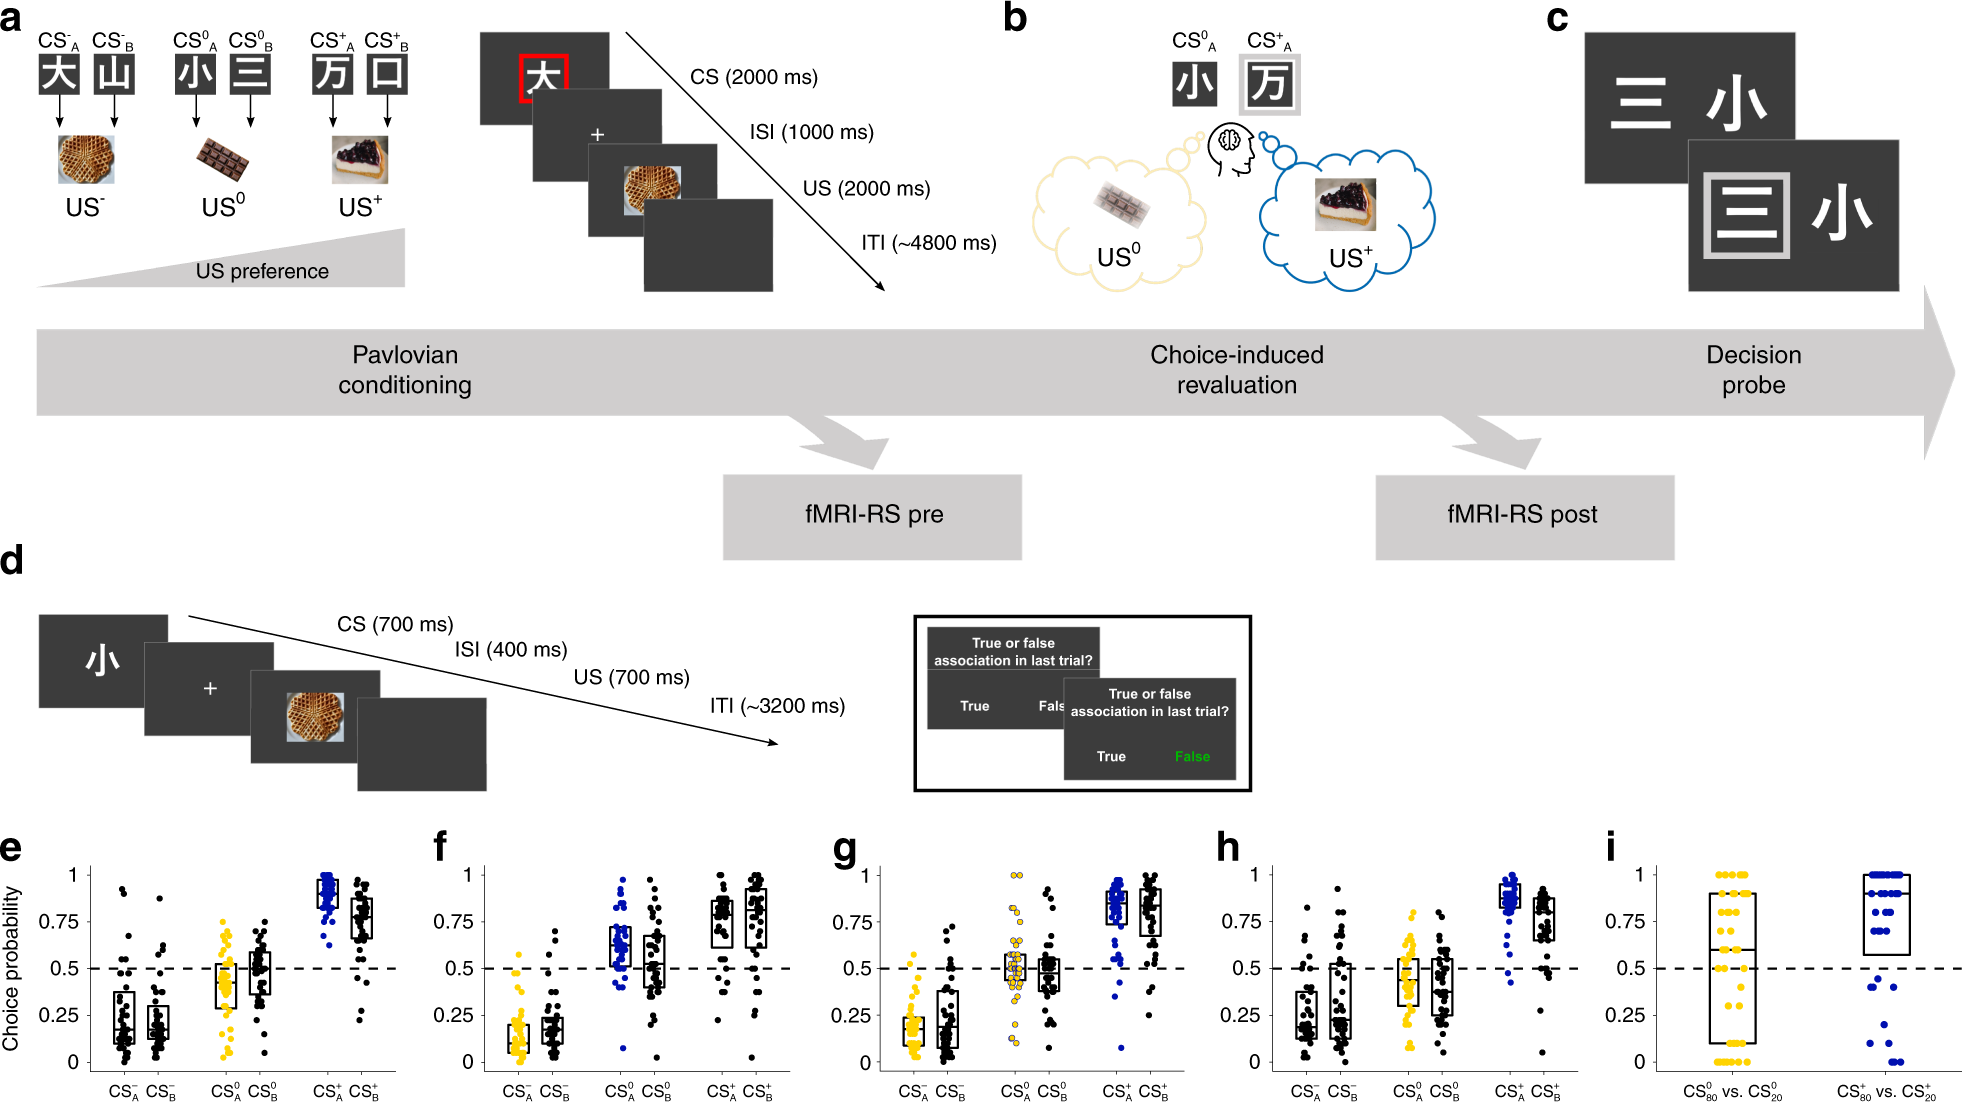 Decisions bias future choices by modifying hippocampal associative memories  | Nature Communications